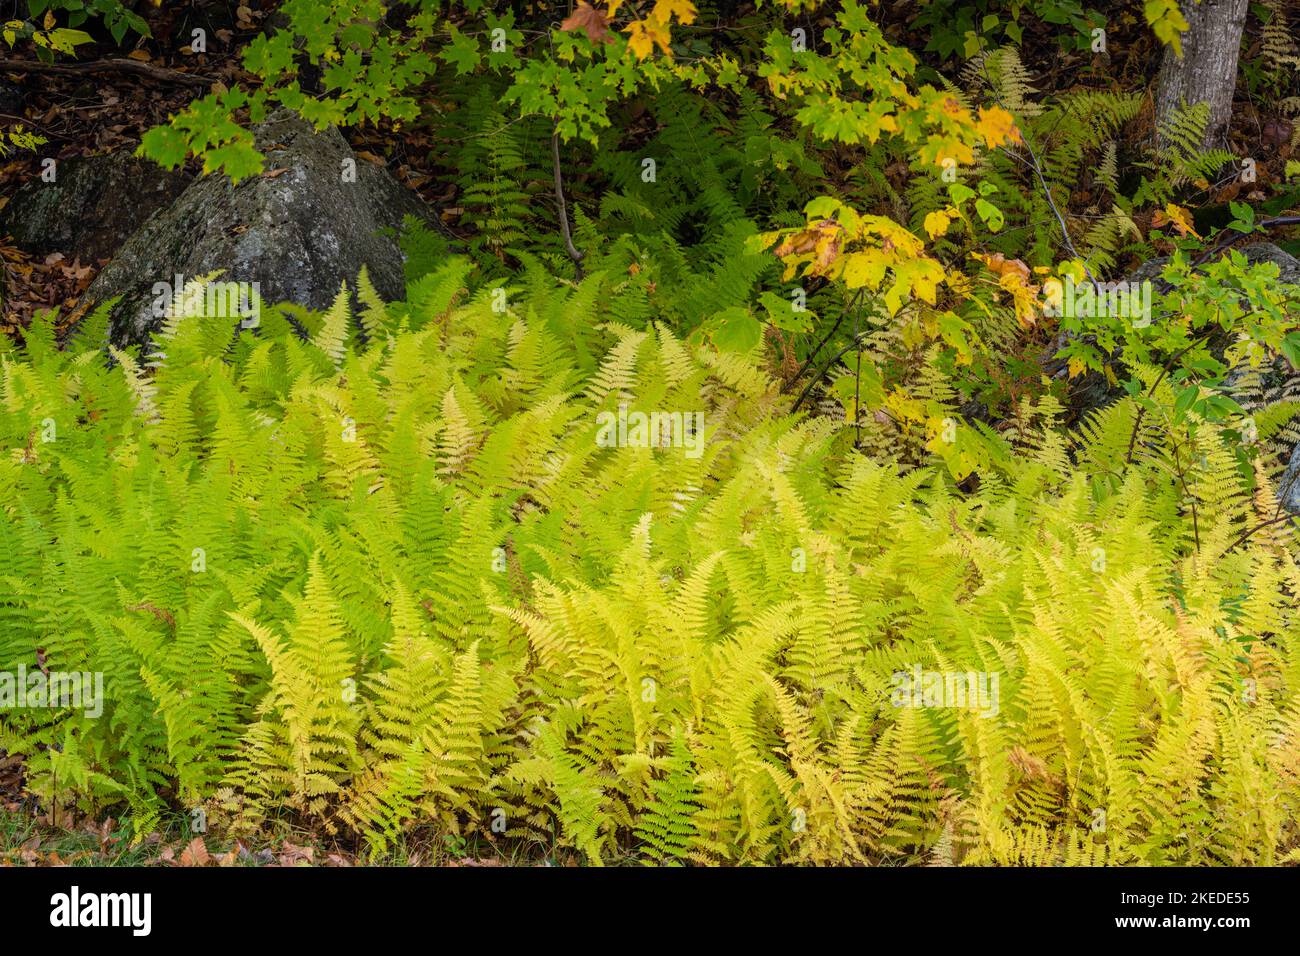 Fern colonies, Crawford Notch State Park, New Hampshire, USA Stock Photo